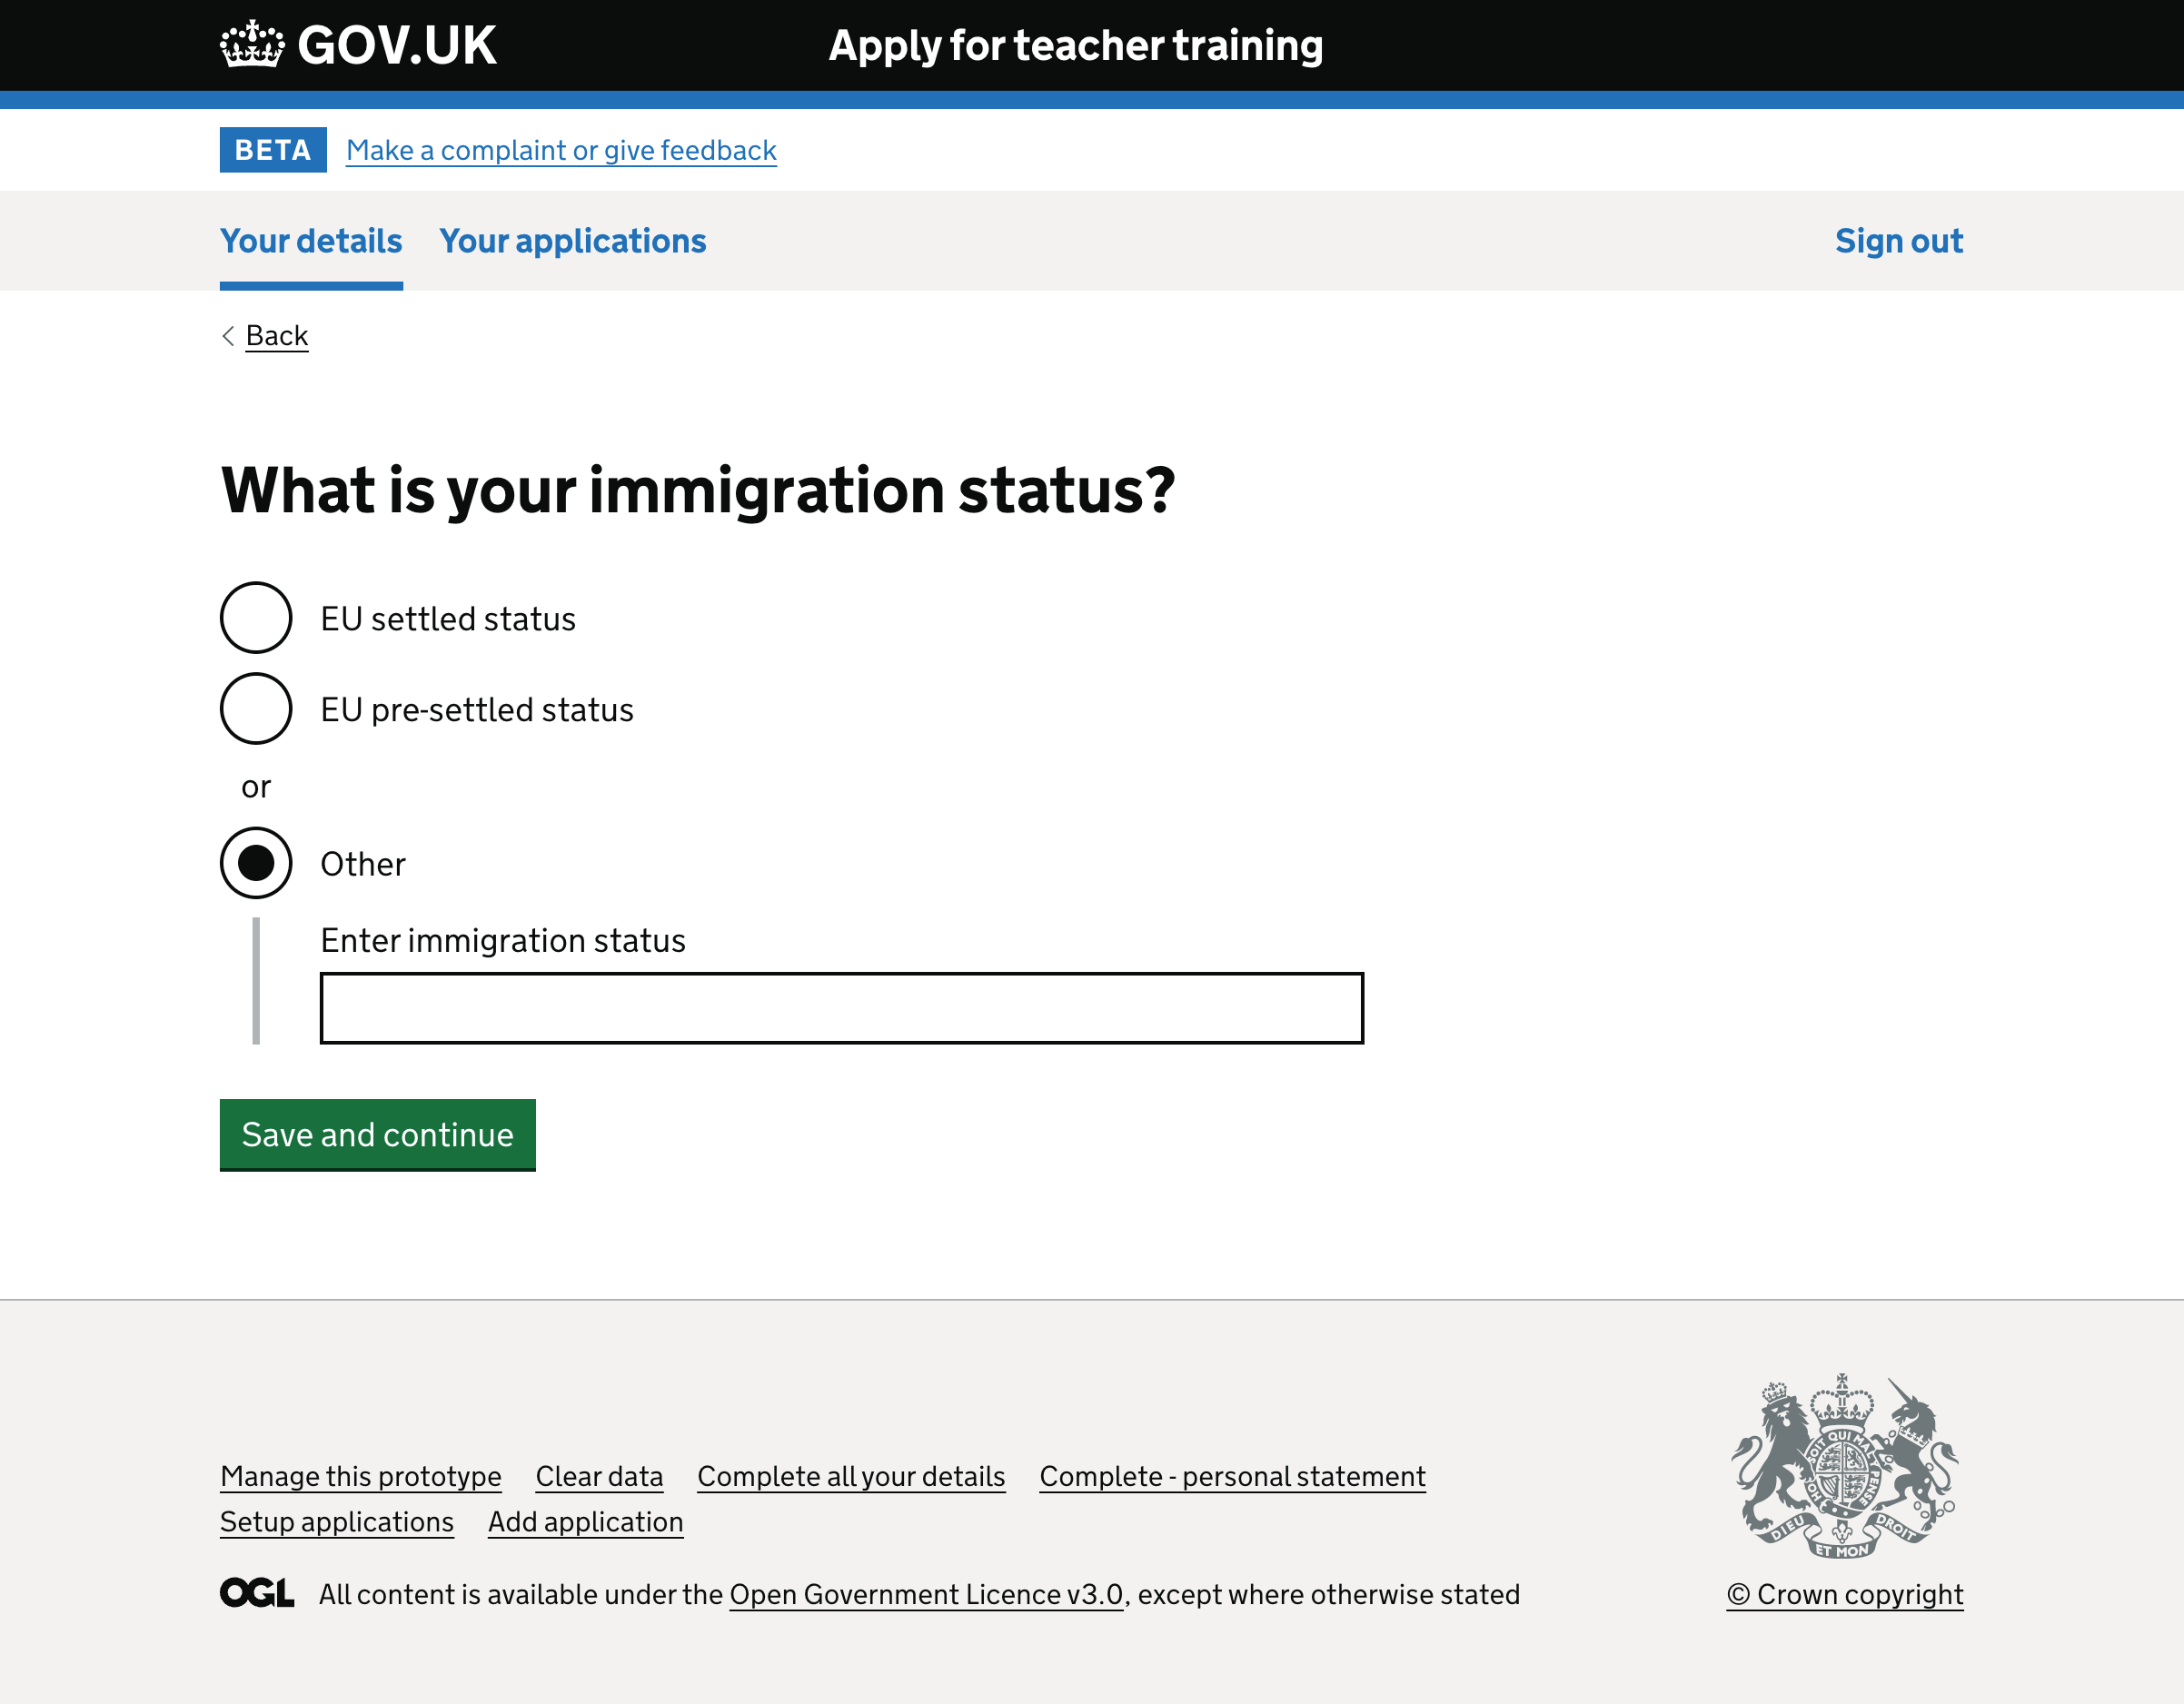 Screenshot of visa or immigration status page showing three radio button options for European economic area users